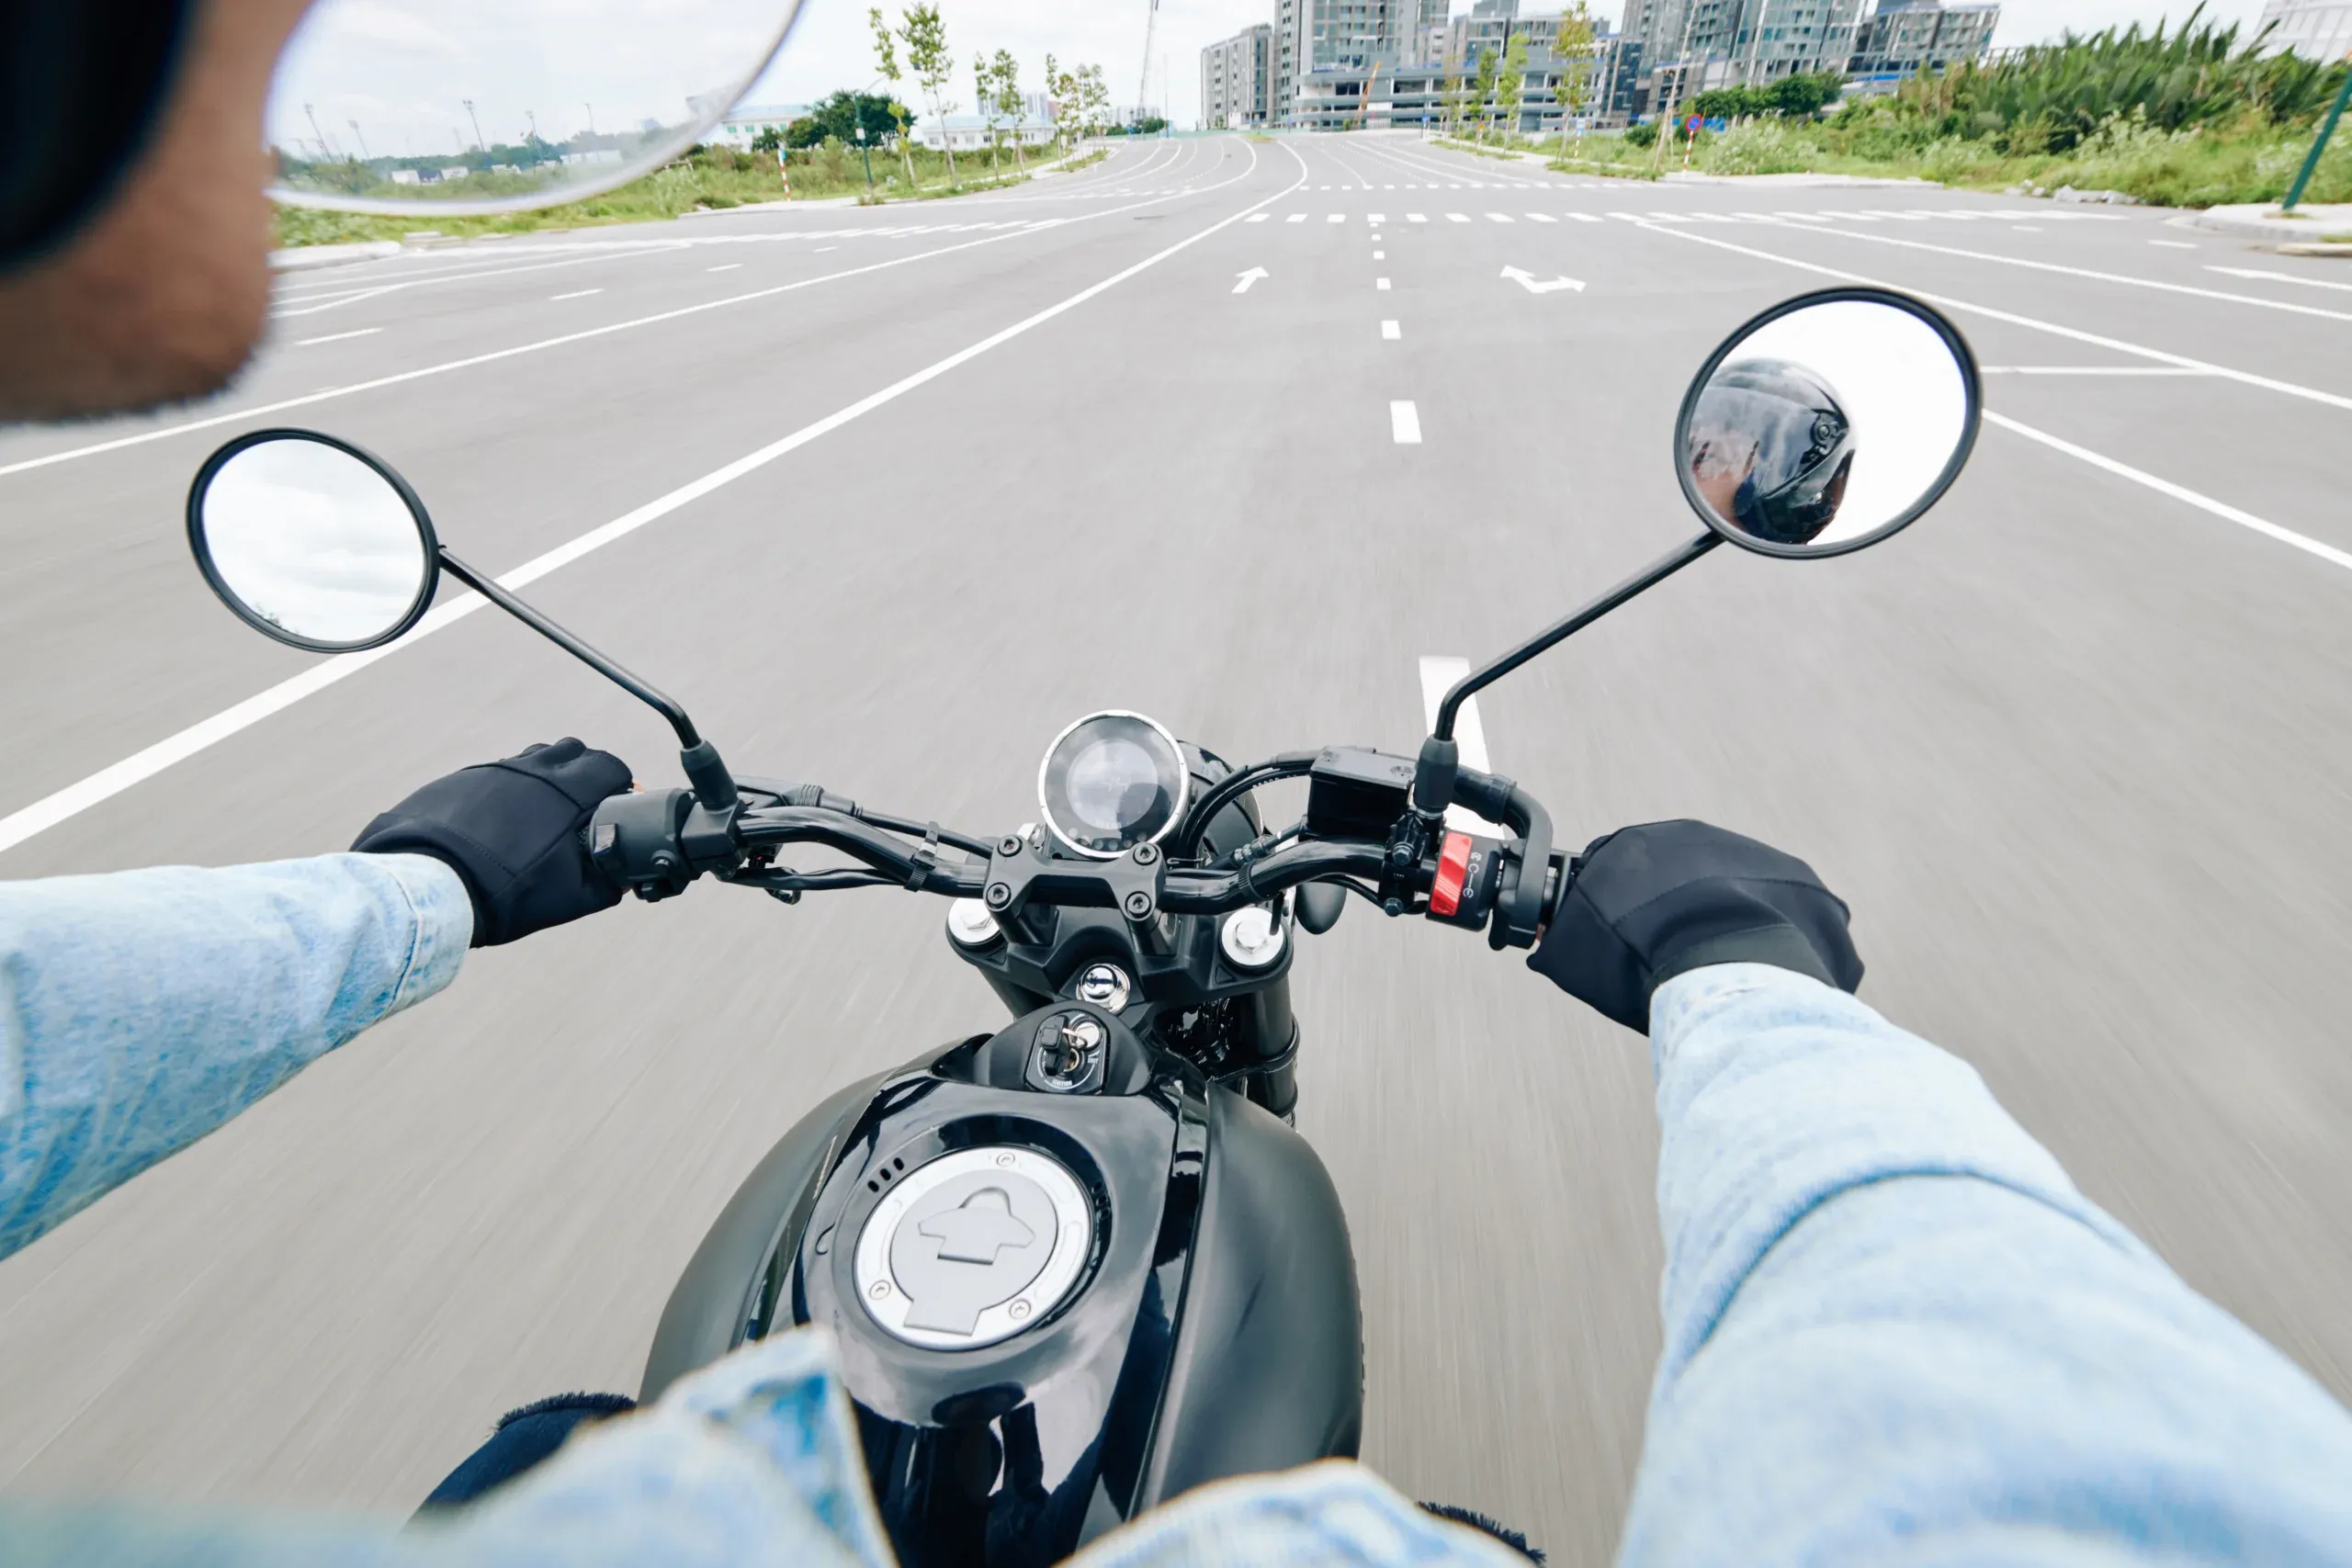 When Do Motorcycles Have the Right of Way?